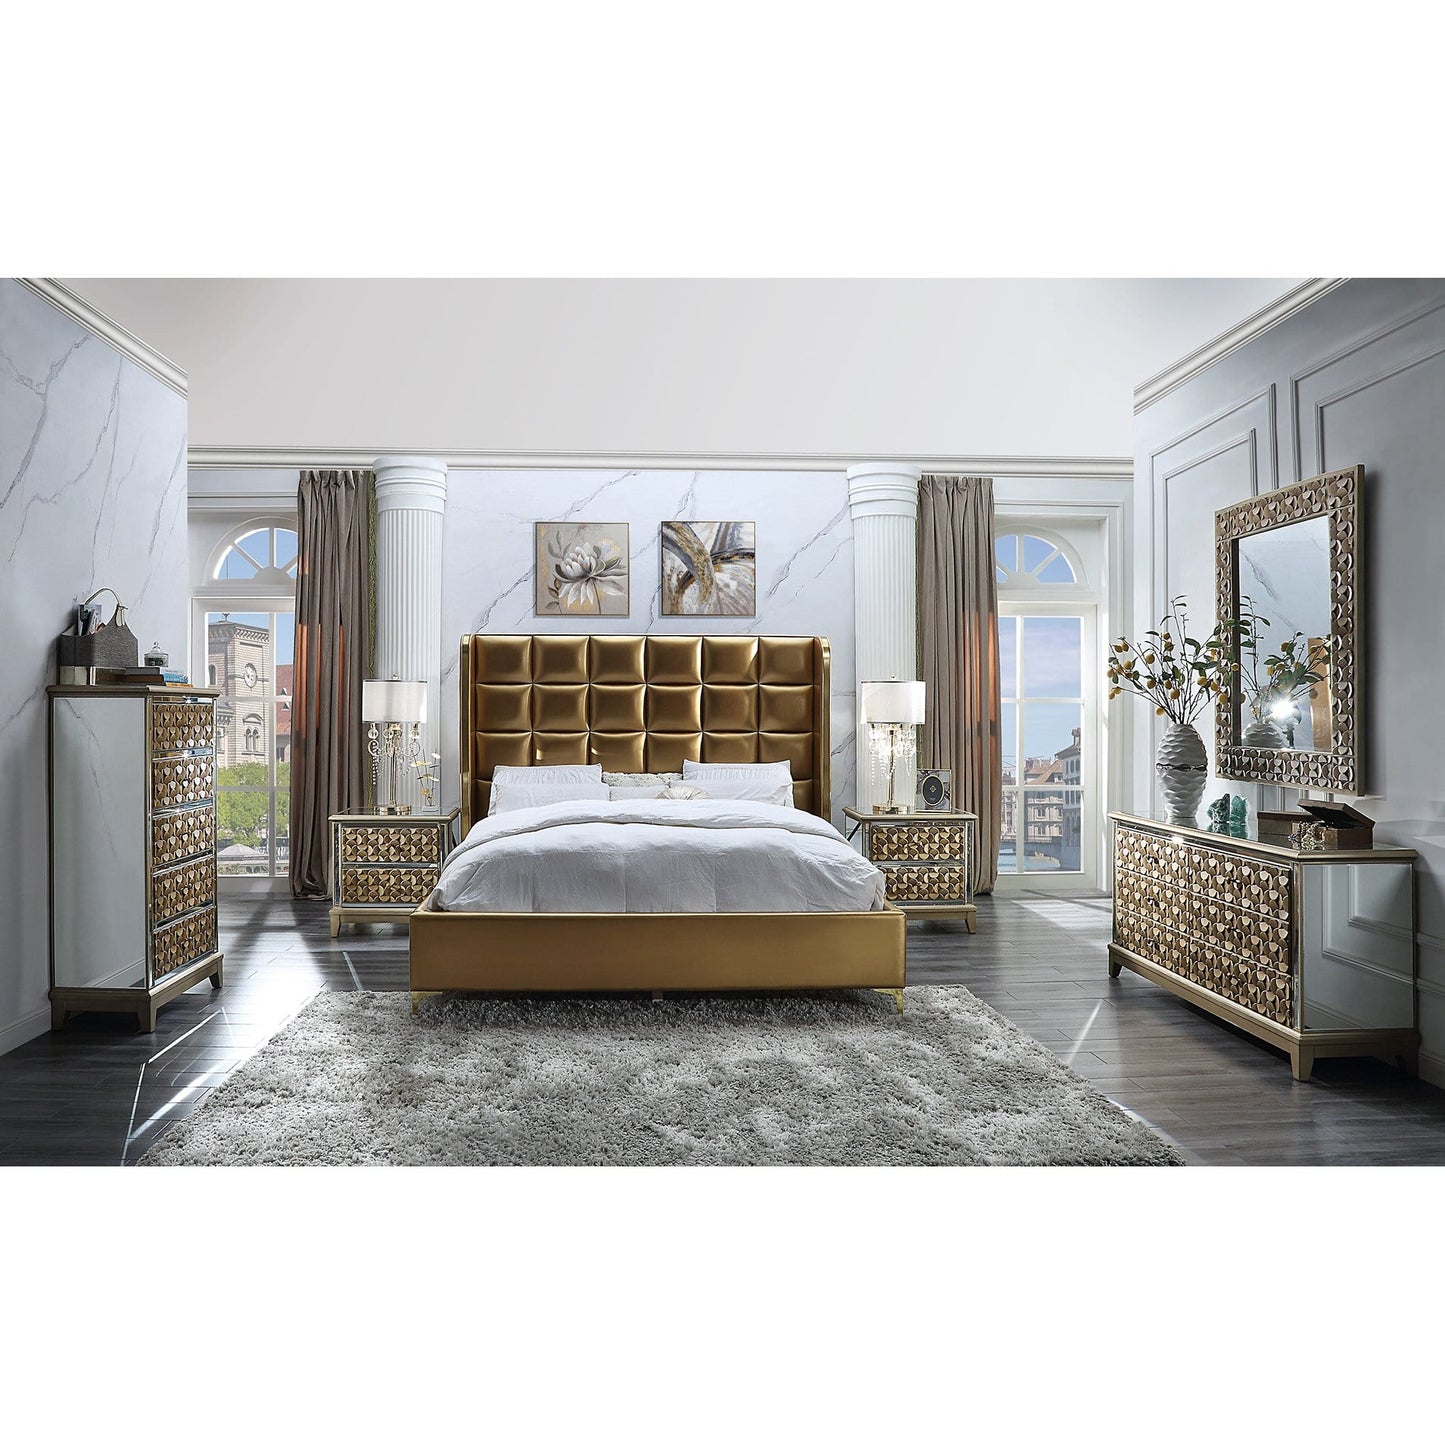 Homey Design Antique Gold & Mirrored 5 PC Bedroom Set HD-6065